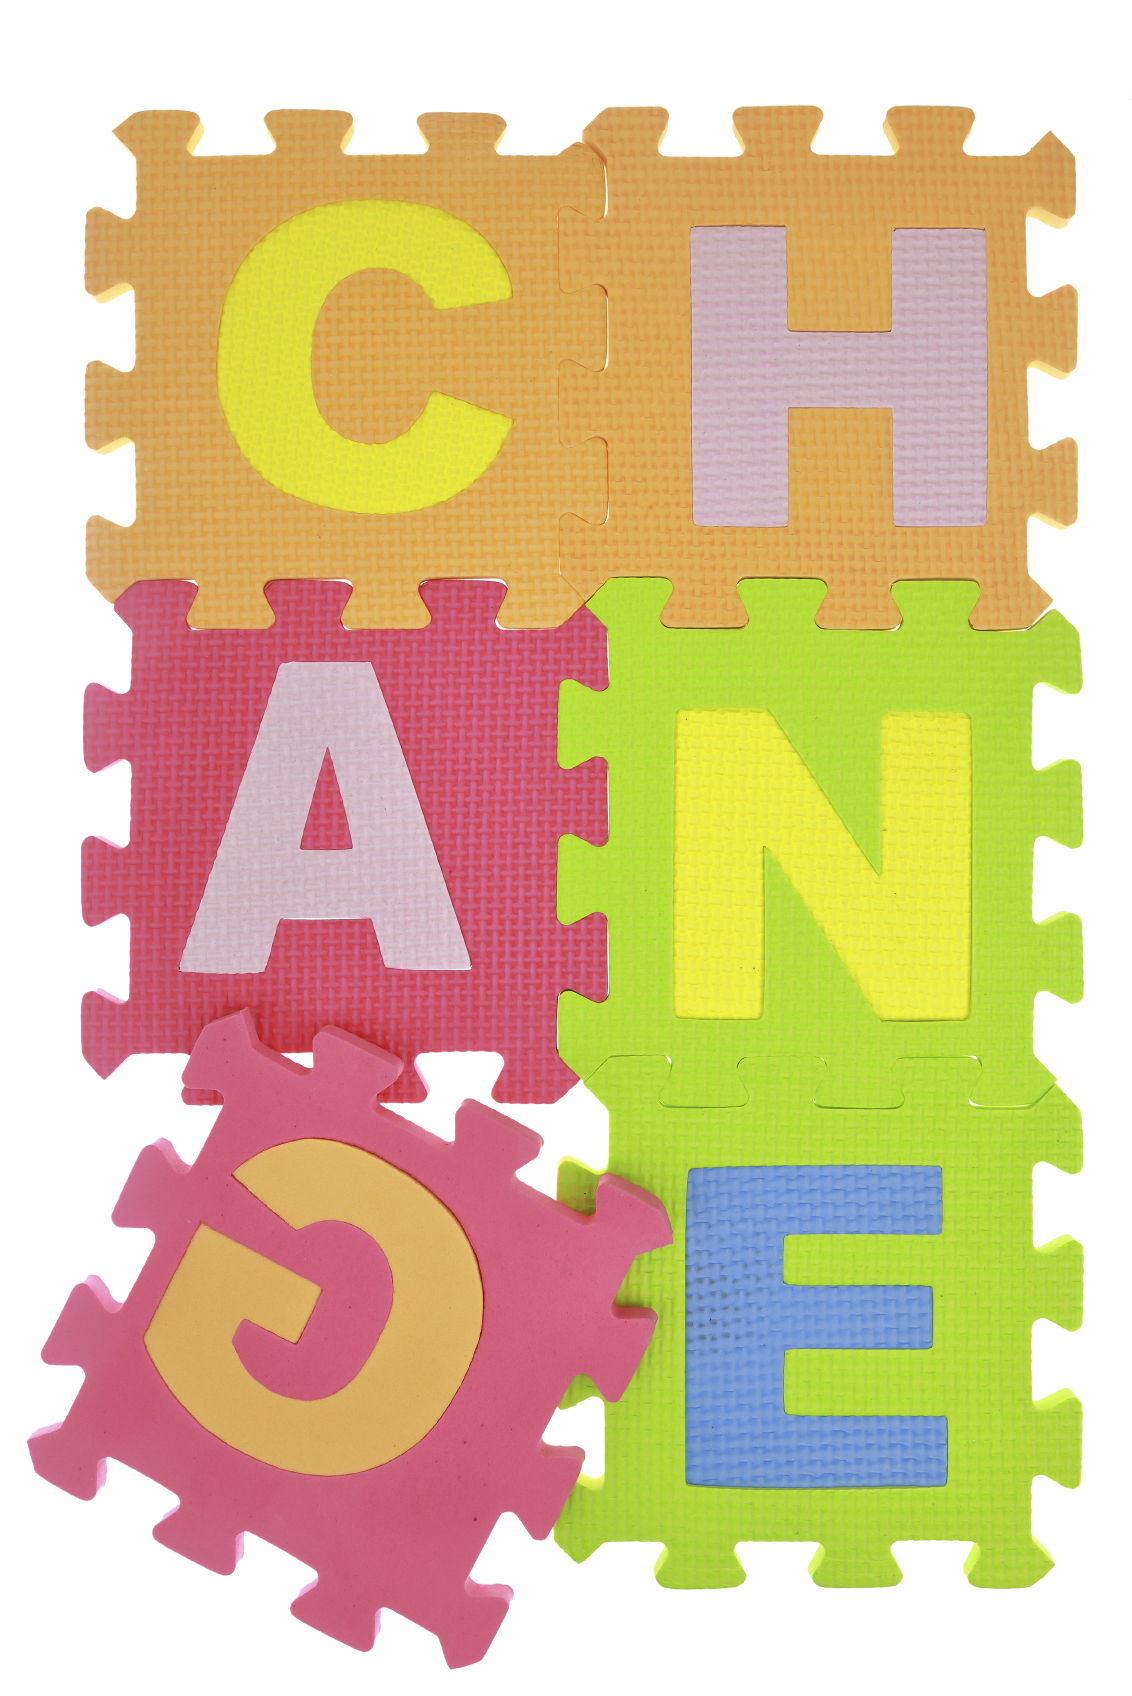 Word "Change" jigsaw puzzle pieces isolated on white